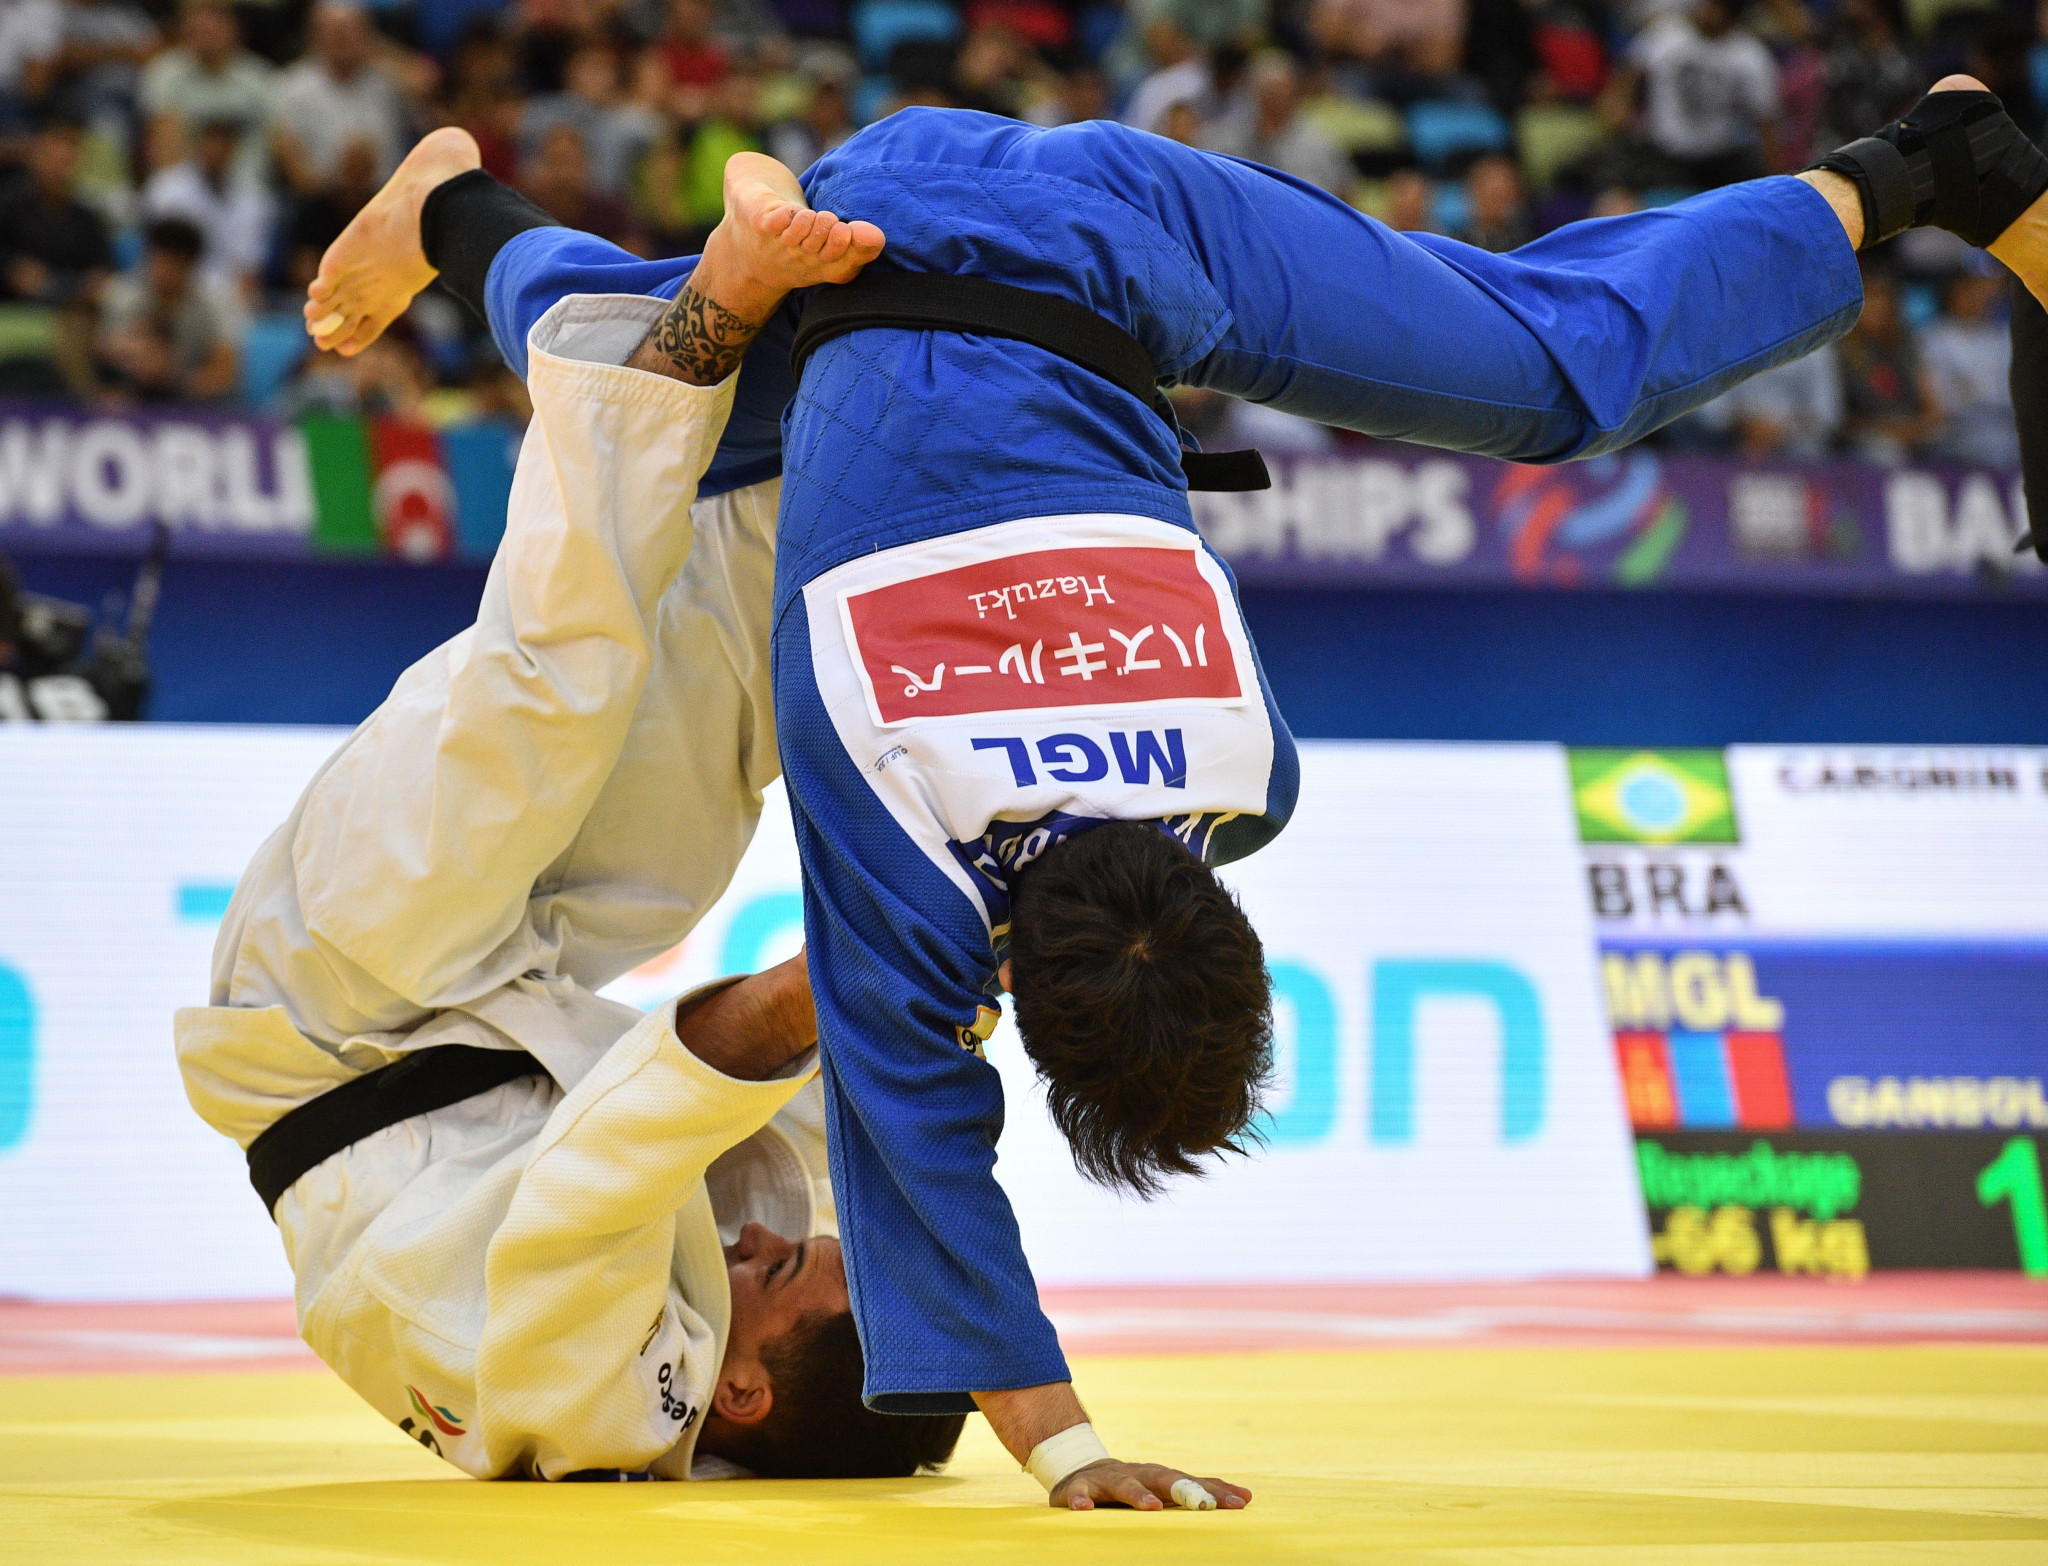 Daniel Cargnin helped Brazil to a double gold medal haul on the opening day of the Pan American Senior Judo Championships in Lima ©Getty Images